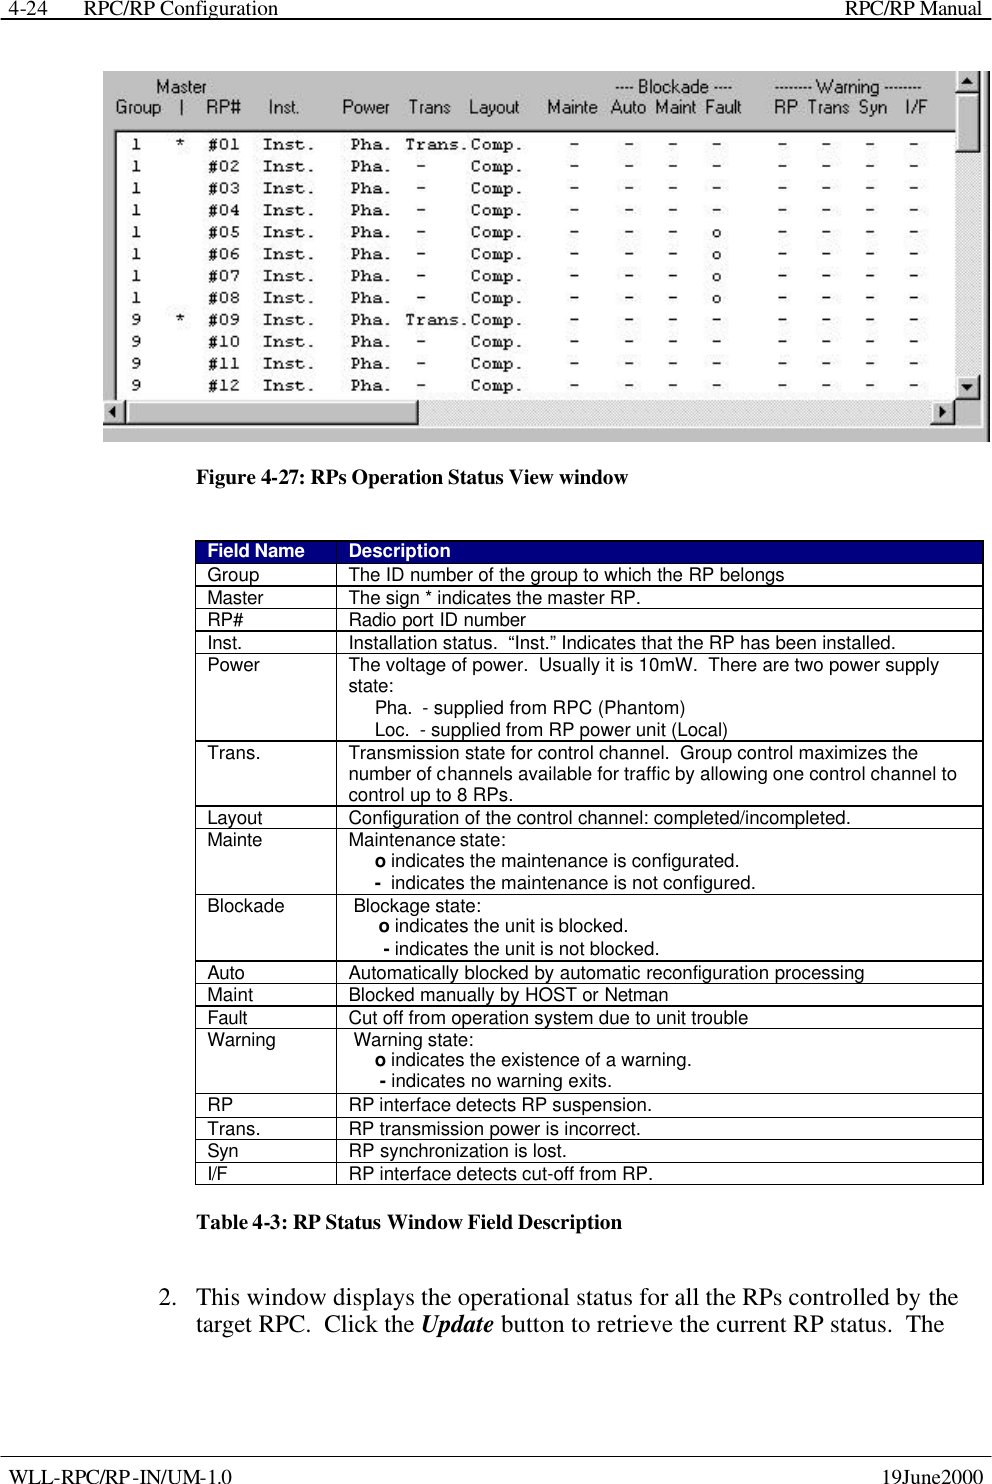  RPC/RP Configuration    RPC/RP Manual   WLL-RPC/RP-IN/UM-1.0    19June2000 4-24 Figure 4-27: RPs Operation Status View window Field Name Description Group The ID number of the group to which the RP belongs Master The sign * indicates the master RP. RP# Radio port ID number Inst. Installation status.  “Inst.” Indicates that the RP has been installed. Power    The voltage of power.  Usually it is 10mW.  There are two power supply  state: Pha.  - supplied from RPC (Phantom) Loc.  - supplied from RP power unit (Local) Trans. Transmission state for control channel.  Group control maximizes the number of channels available for traffic by allowing one control channel to control up to 8 RPs. Layout    Configuration of the control channel: completed/incompleted. Mainte Maintenance state: o indicates the maintenance is configurated. -  indicates the maintenance is not configured. Blockade  Blockage state: o indicates the unit is blocked.  - indicates the unit is not blocked. Auto Automatically blocked by automatic reconfiguration processing Maint Blocked manually by HOST or Netman Fault Cut off from operation system due to unit trouble Warning  Warning state: o indicates the existence of a warning.    - indicates no warning exits. RP RP interface detects RP suspension. Trans. RP transmission power is incorrect. Syn RP synchronization is lost.  I/F RP interface detects cut-off from RP. Table 4-3: RP Status Window Field Description 2.  This window displays the operational status for all the RPs controlled by the target RPC.  Click the Update button to retrieve the current RP status.  The 